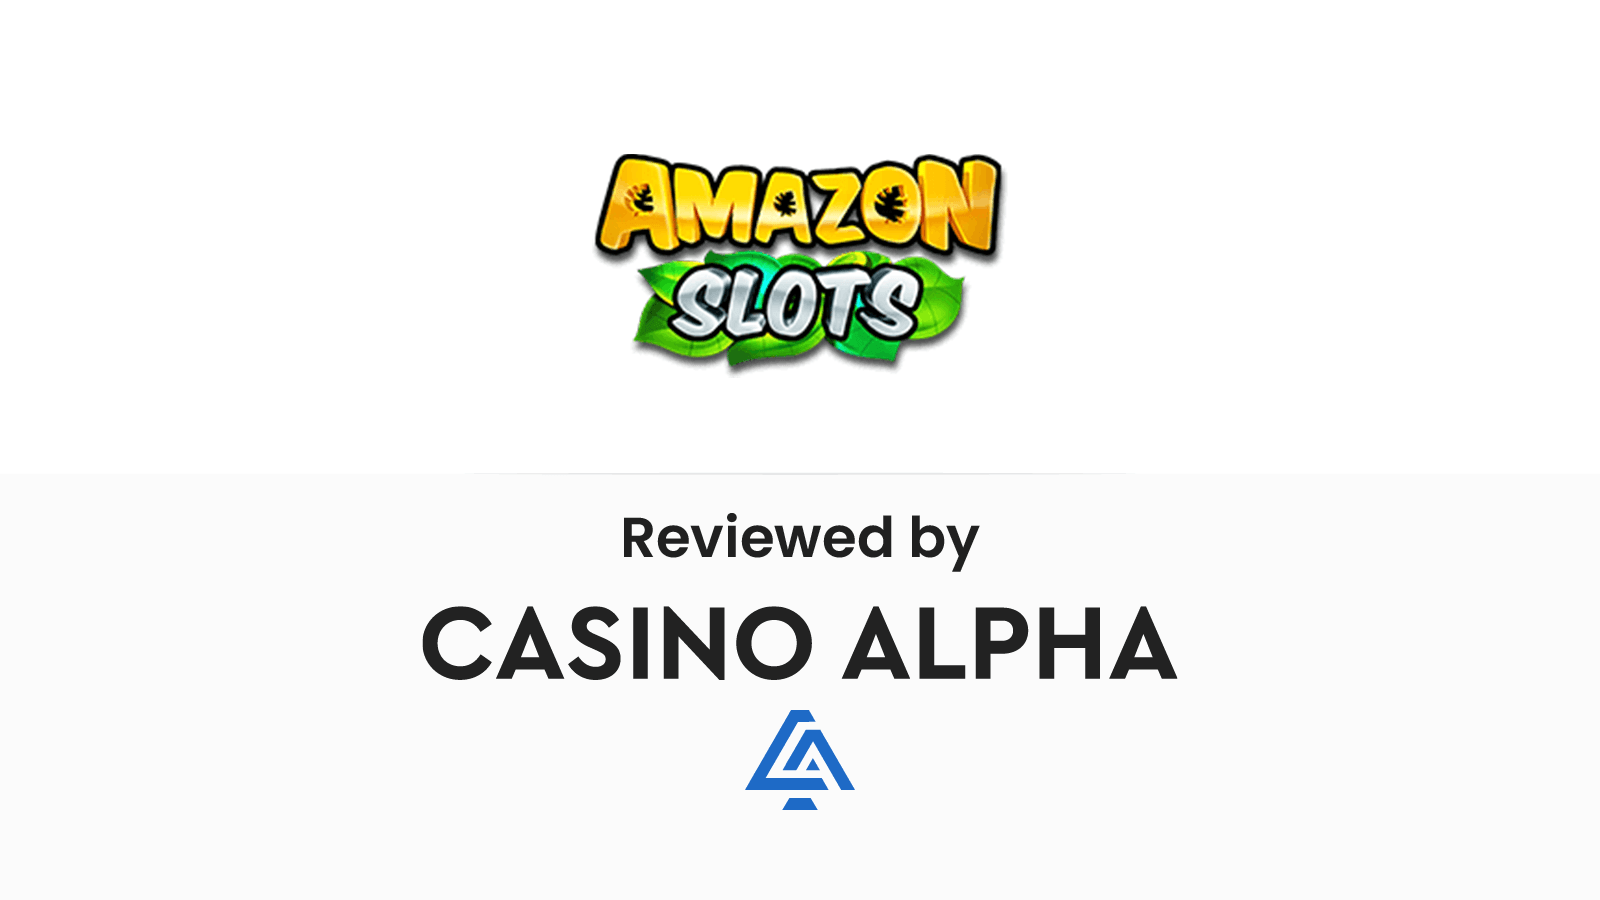 Amazon Slots Review & Offers